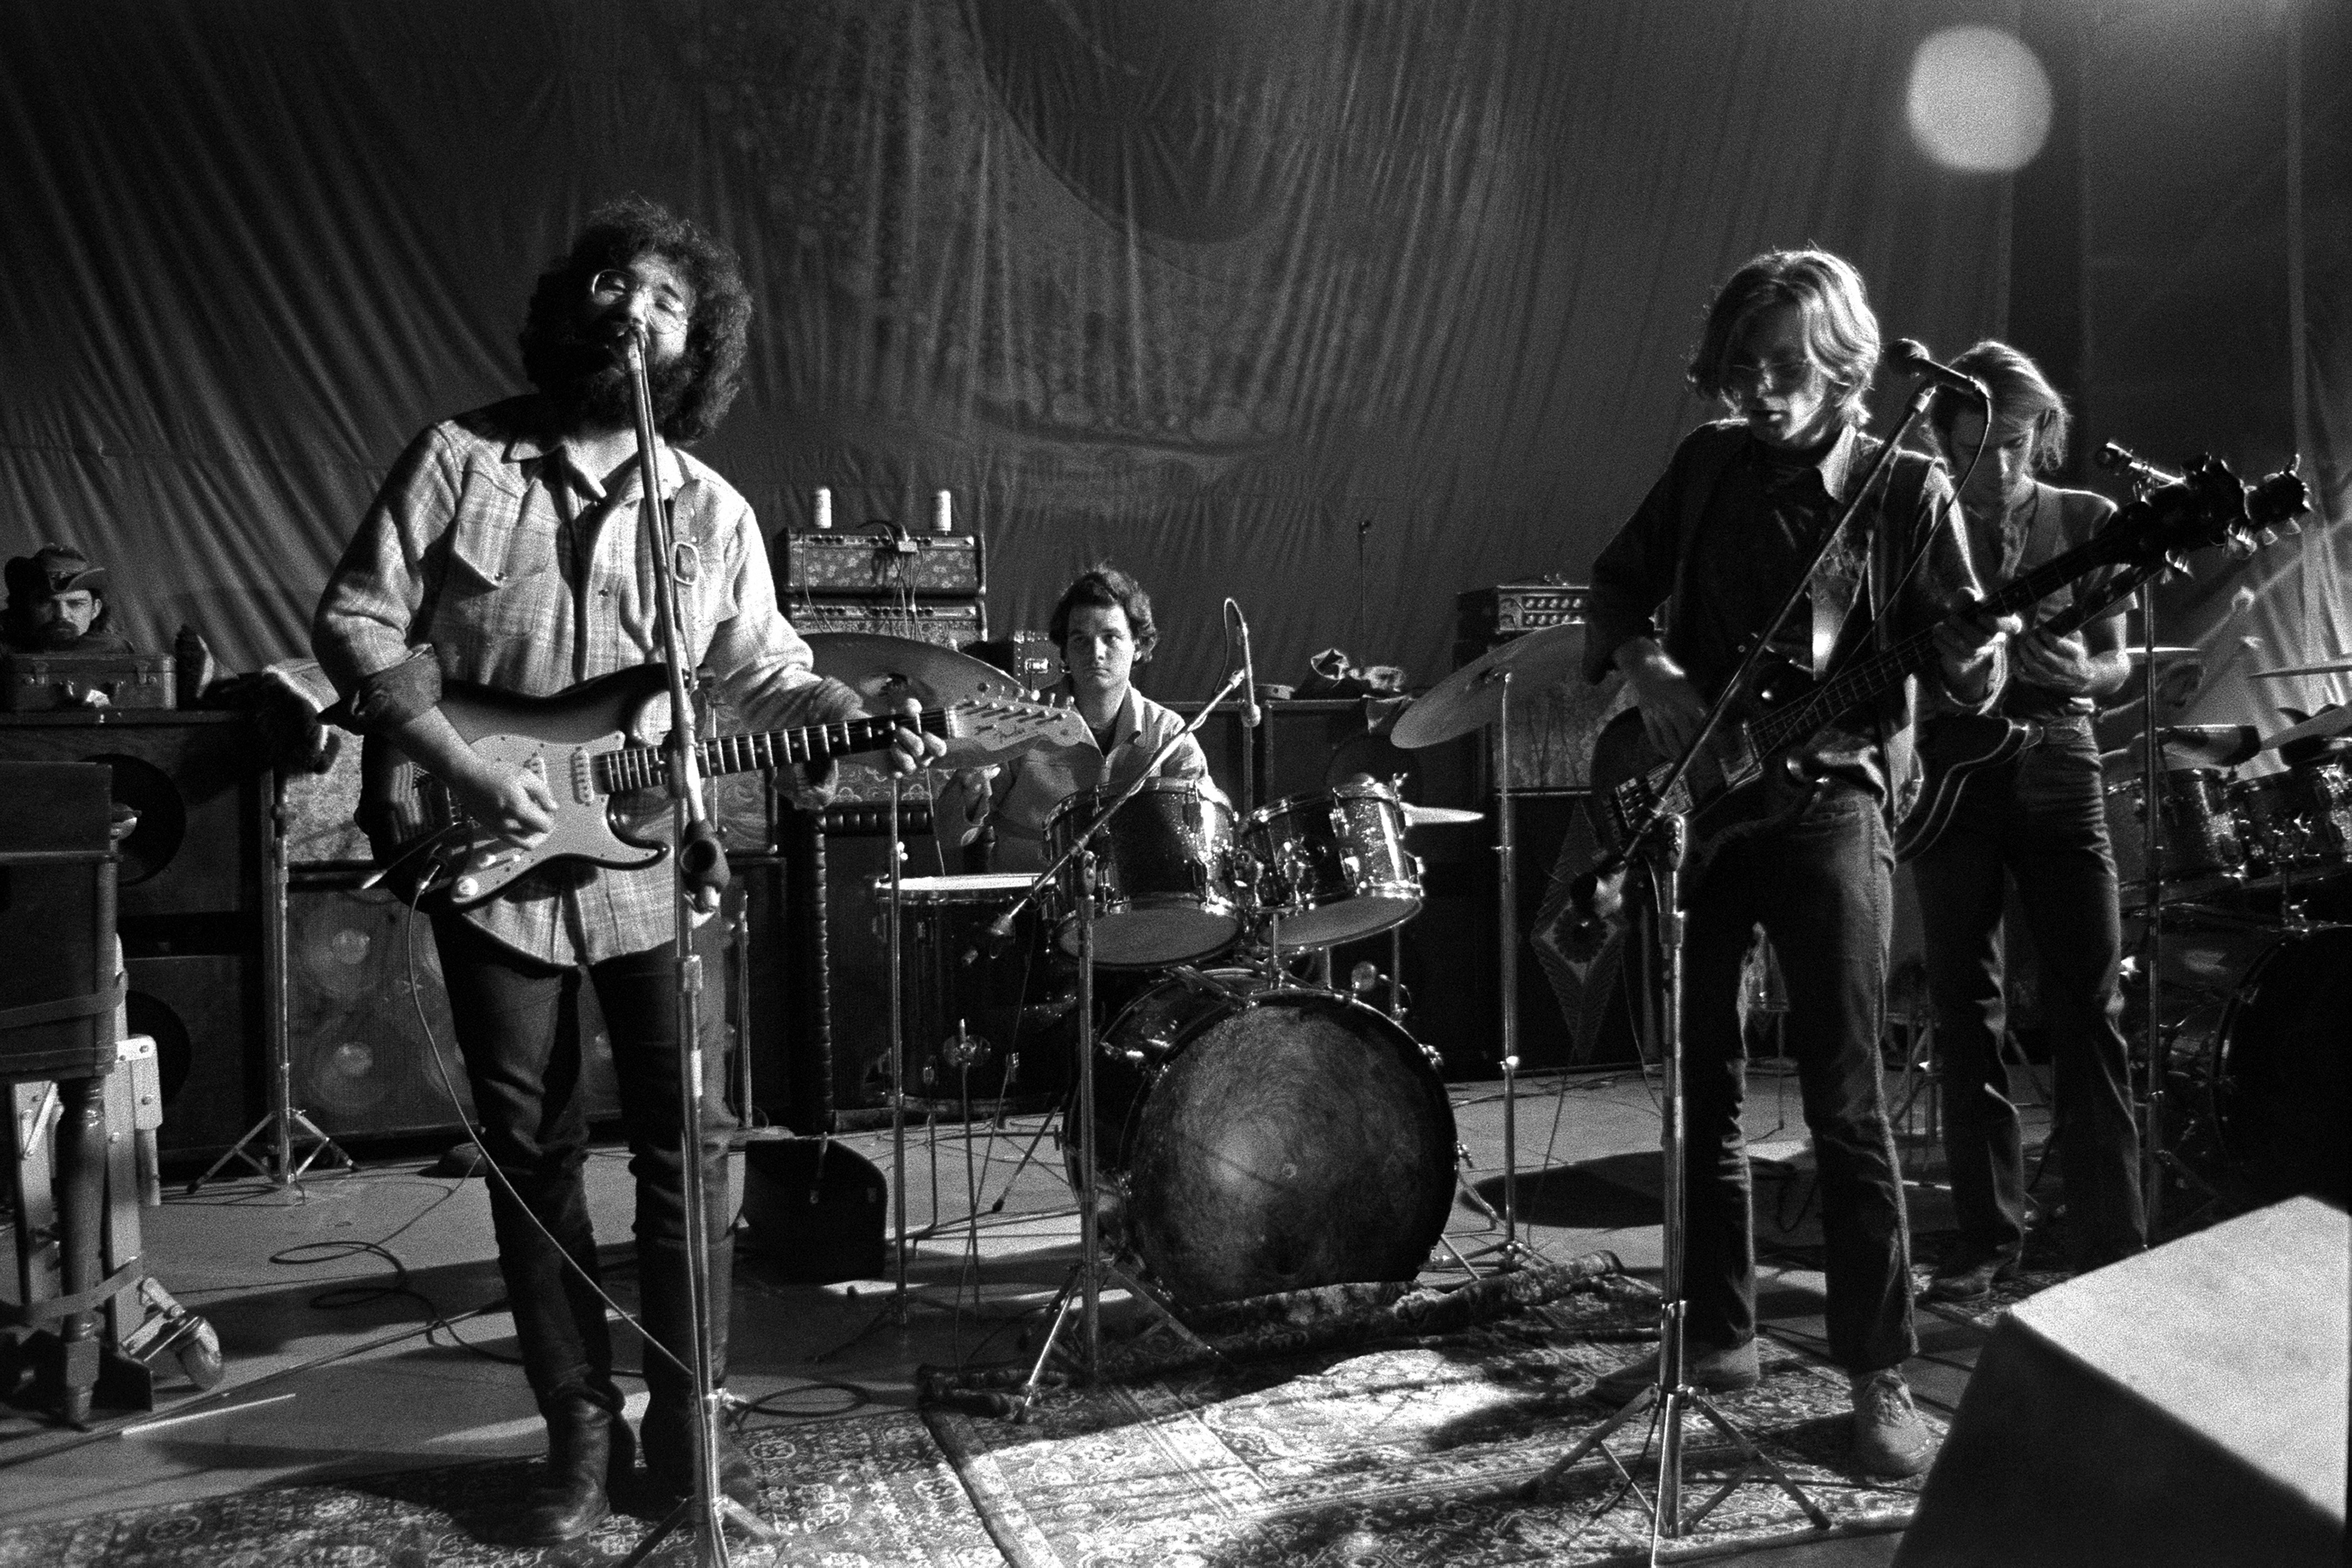 The Music Never Stopped The free-flowing approach to music that the band perfected over three decades of playing together was possible because of the extraordinary abilities of the musicians Garcia partnered with. After his death, guitarist Bob Weir and bassist Phil Lesh formed a series of bands — the current incarnation is called Furthur — while drummers Bill Kreutzmann and Mickey Hart (not visible in this photo) lead the group the Rhythm Devils. In 1970, when this photo was taken, the group included Ron  Pigpen  McKernan, rear left, who sang and played keyboards and harmonica. He died in 1973.